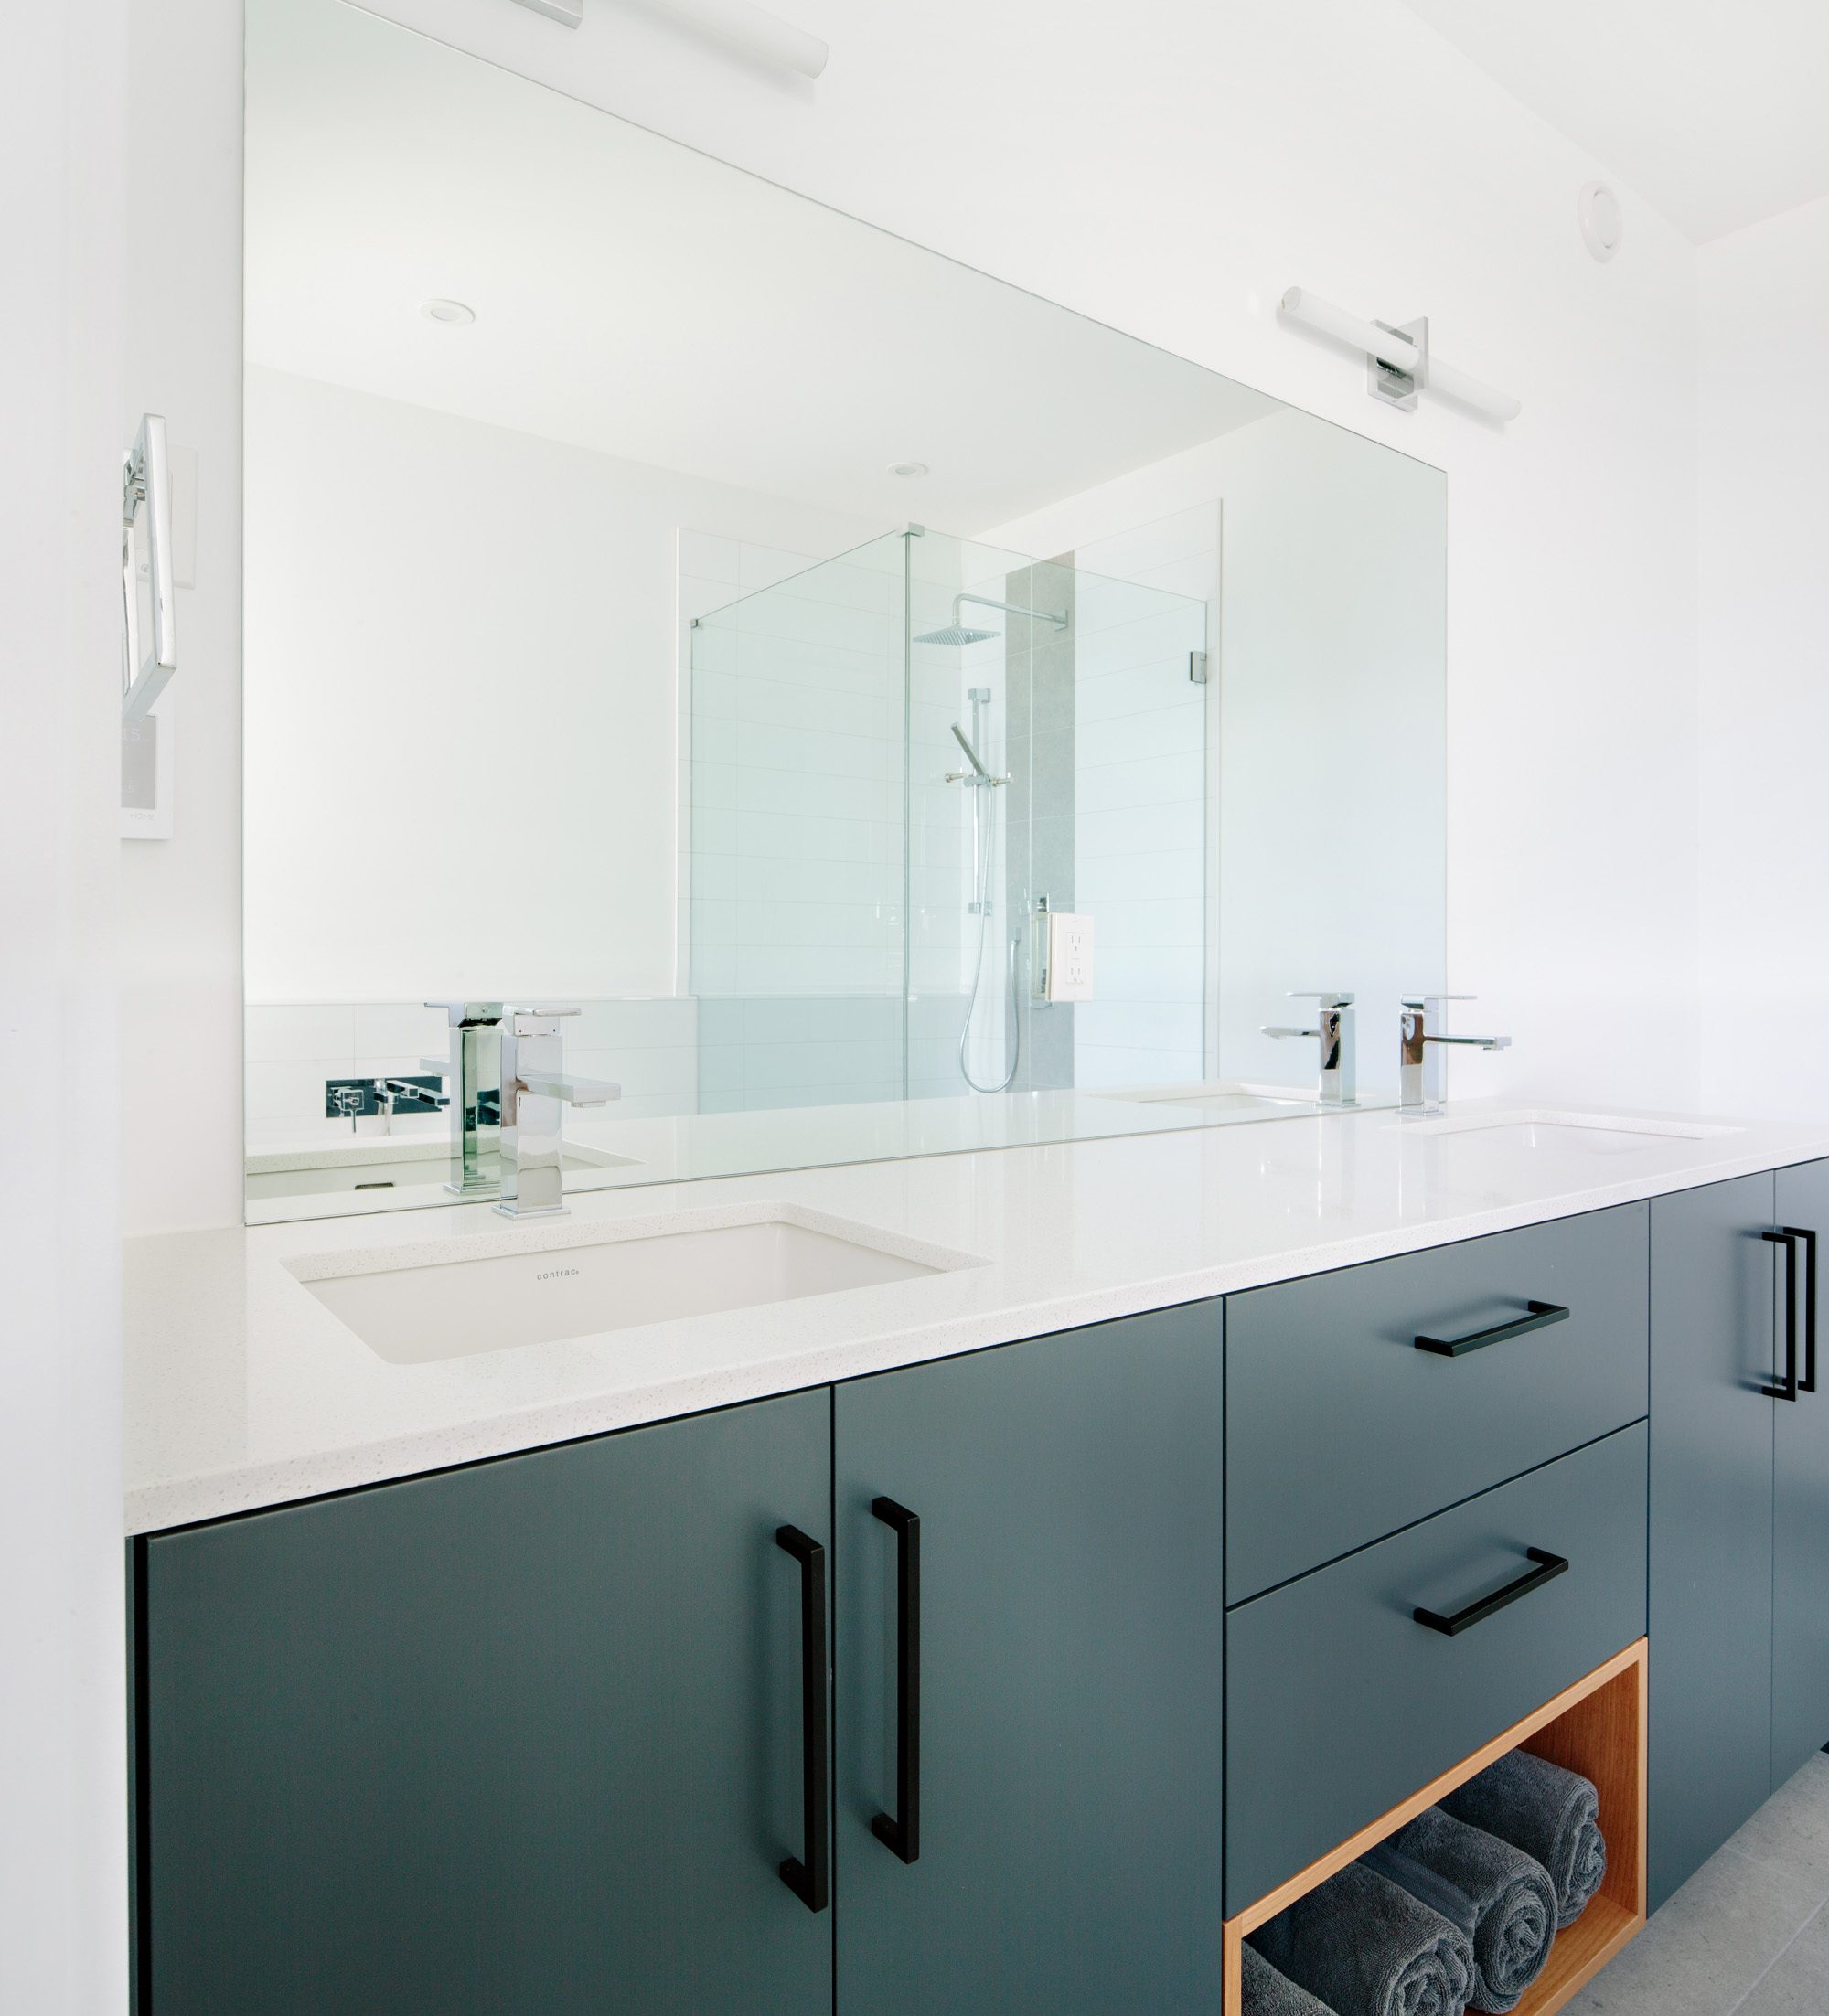 Image of a bathroom vanity with large mirror, double sinks and custom grey cabinets with white countertops. Built by Whitfield Homes